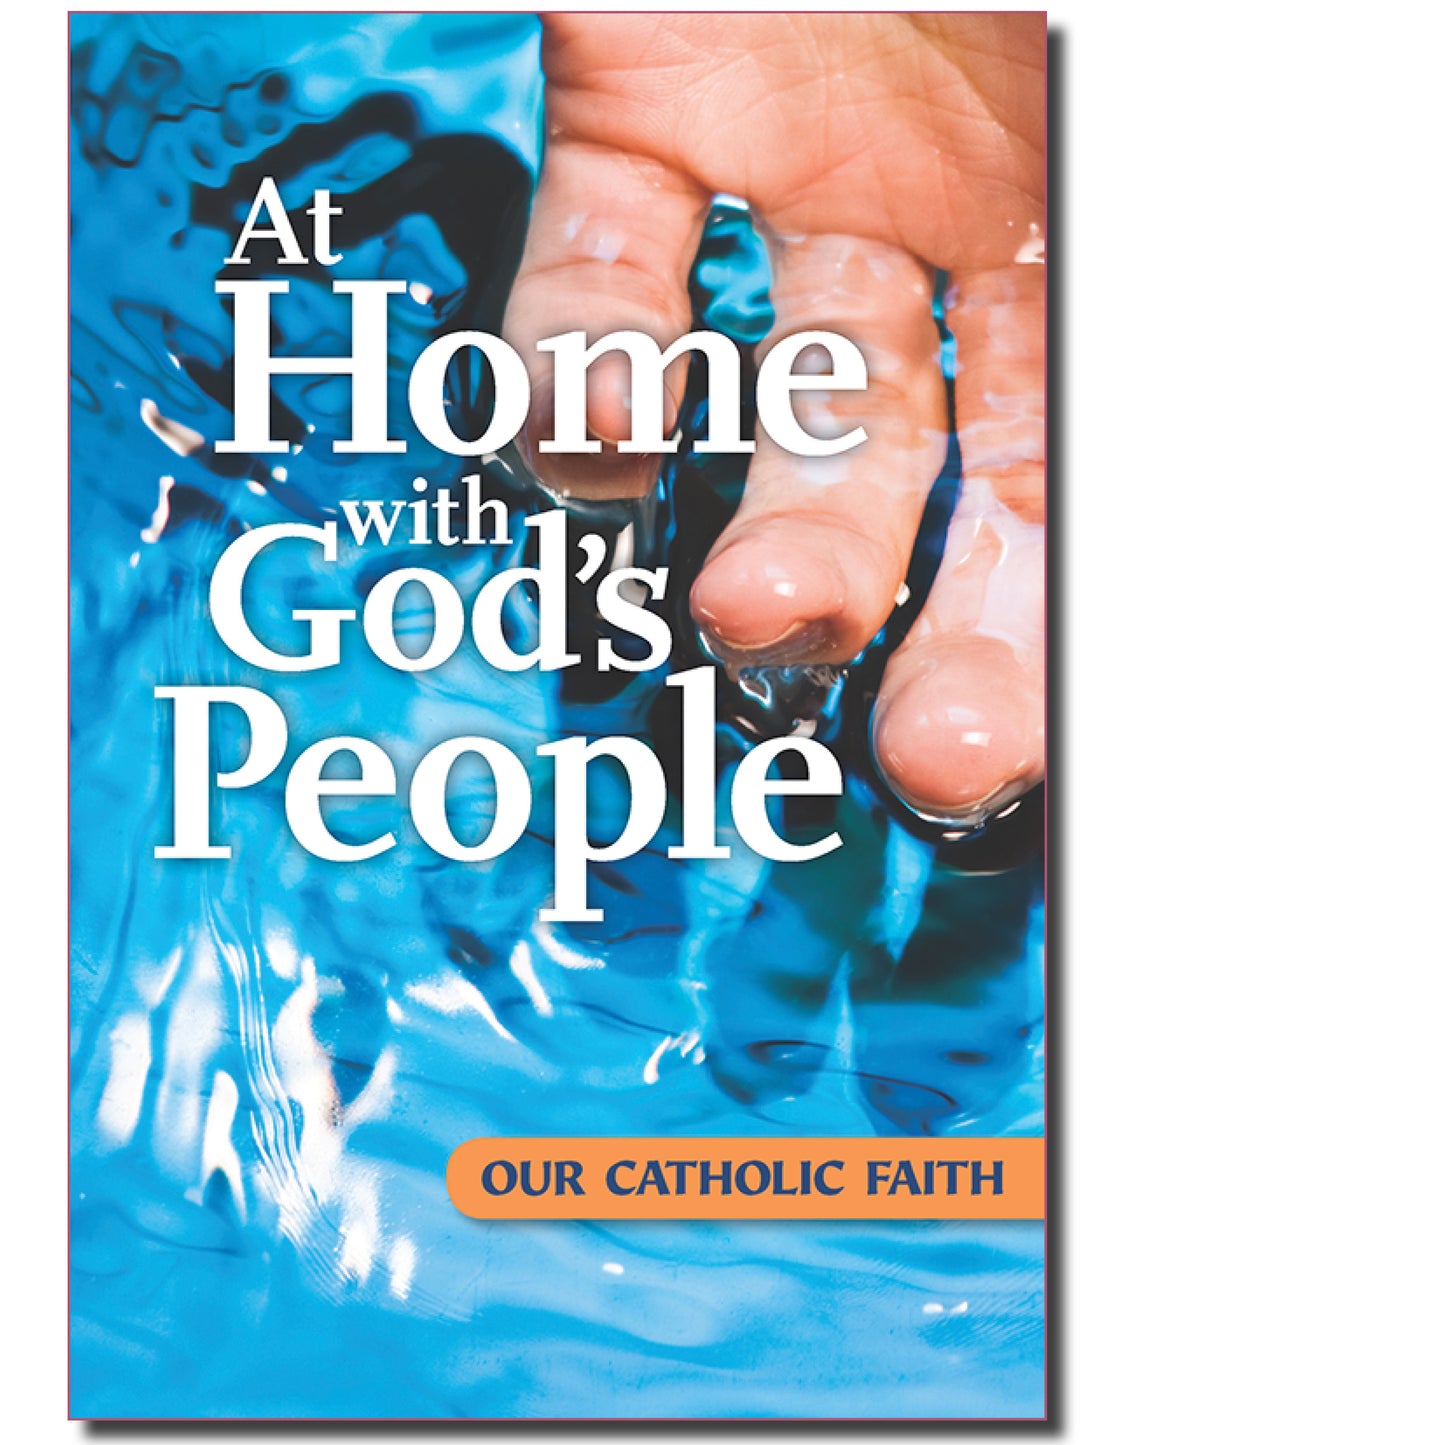 At Home with God's People: Our Catholic Faith